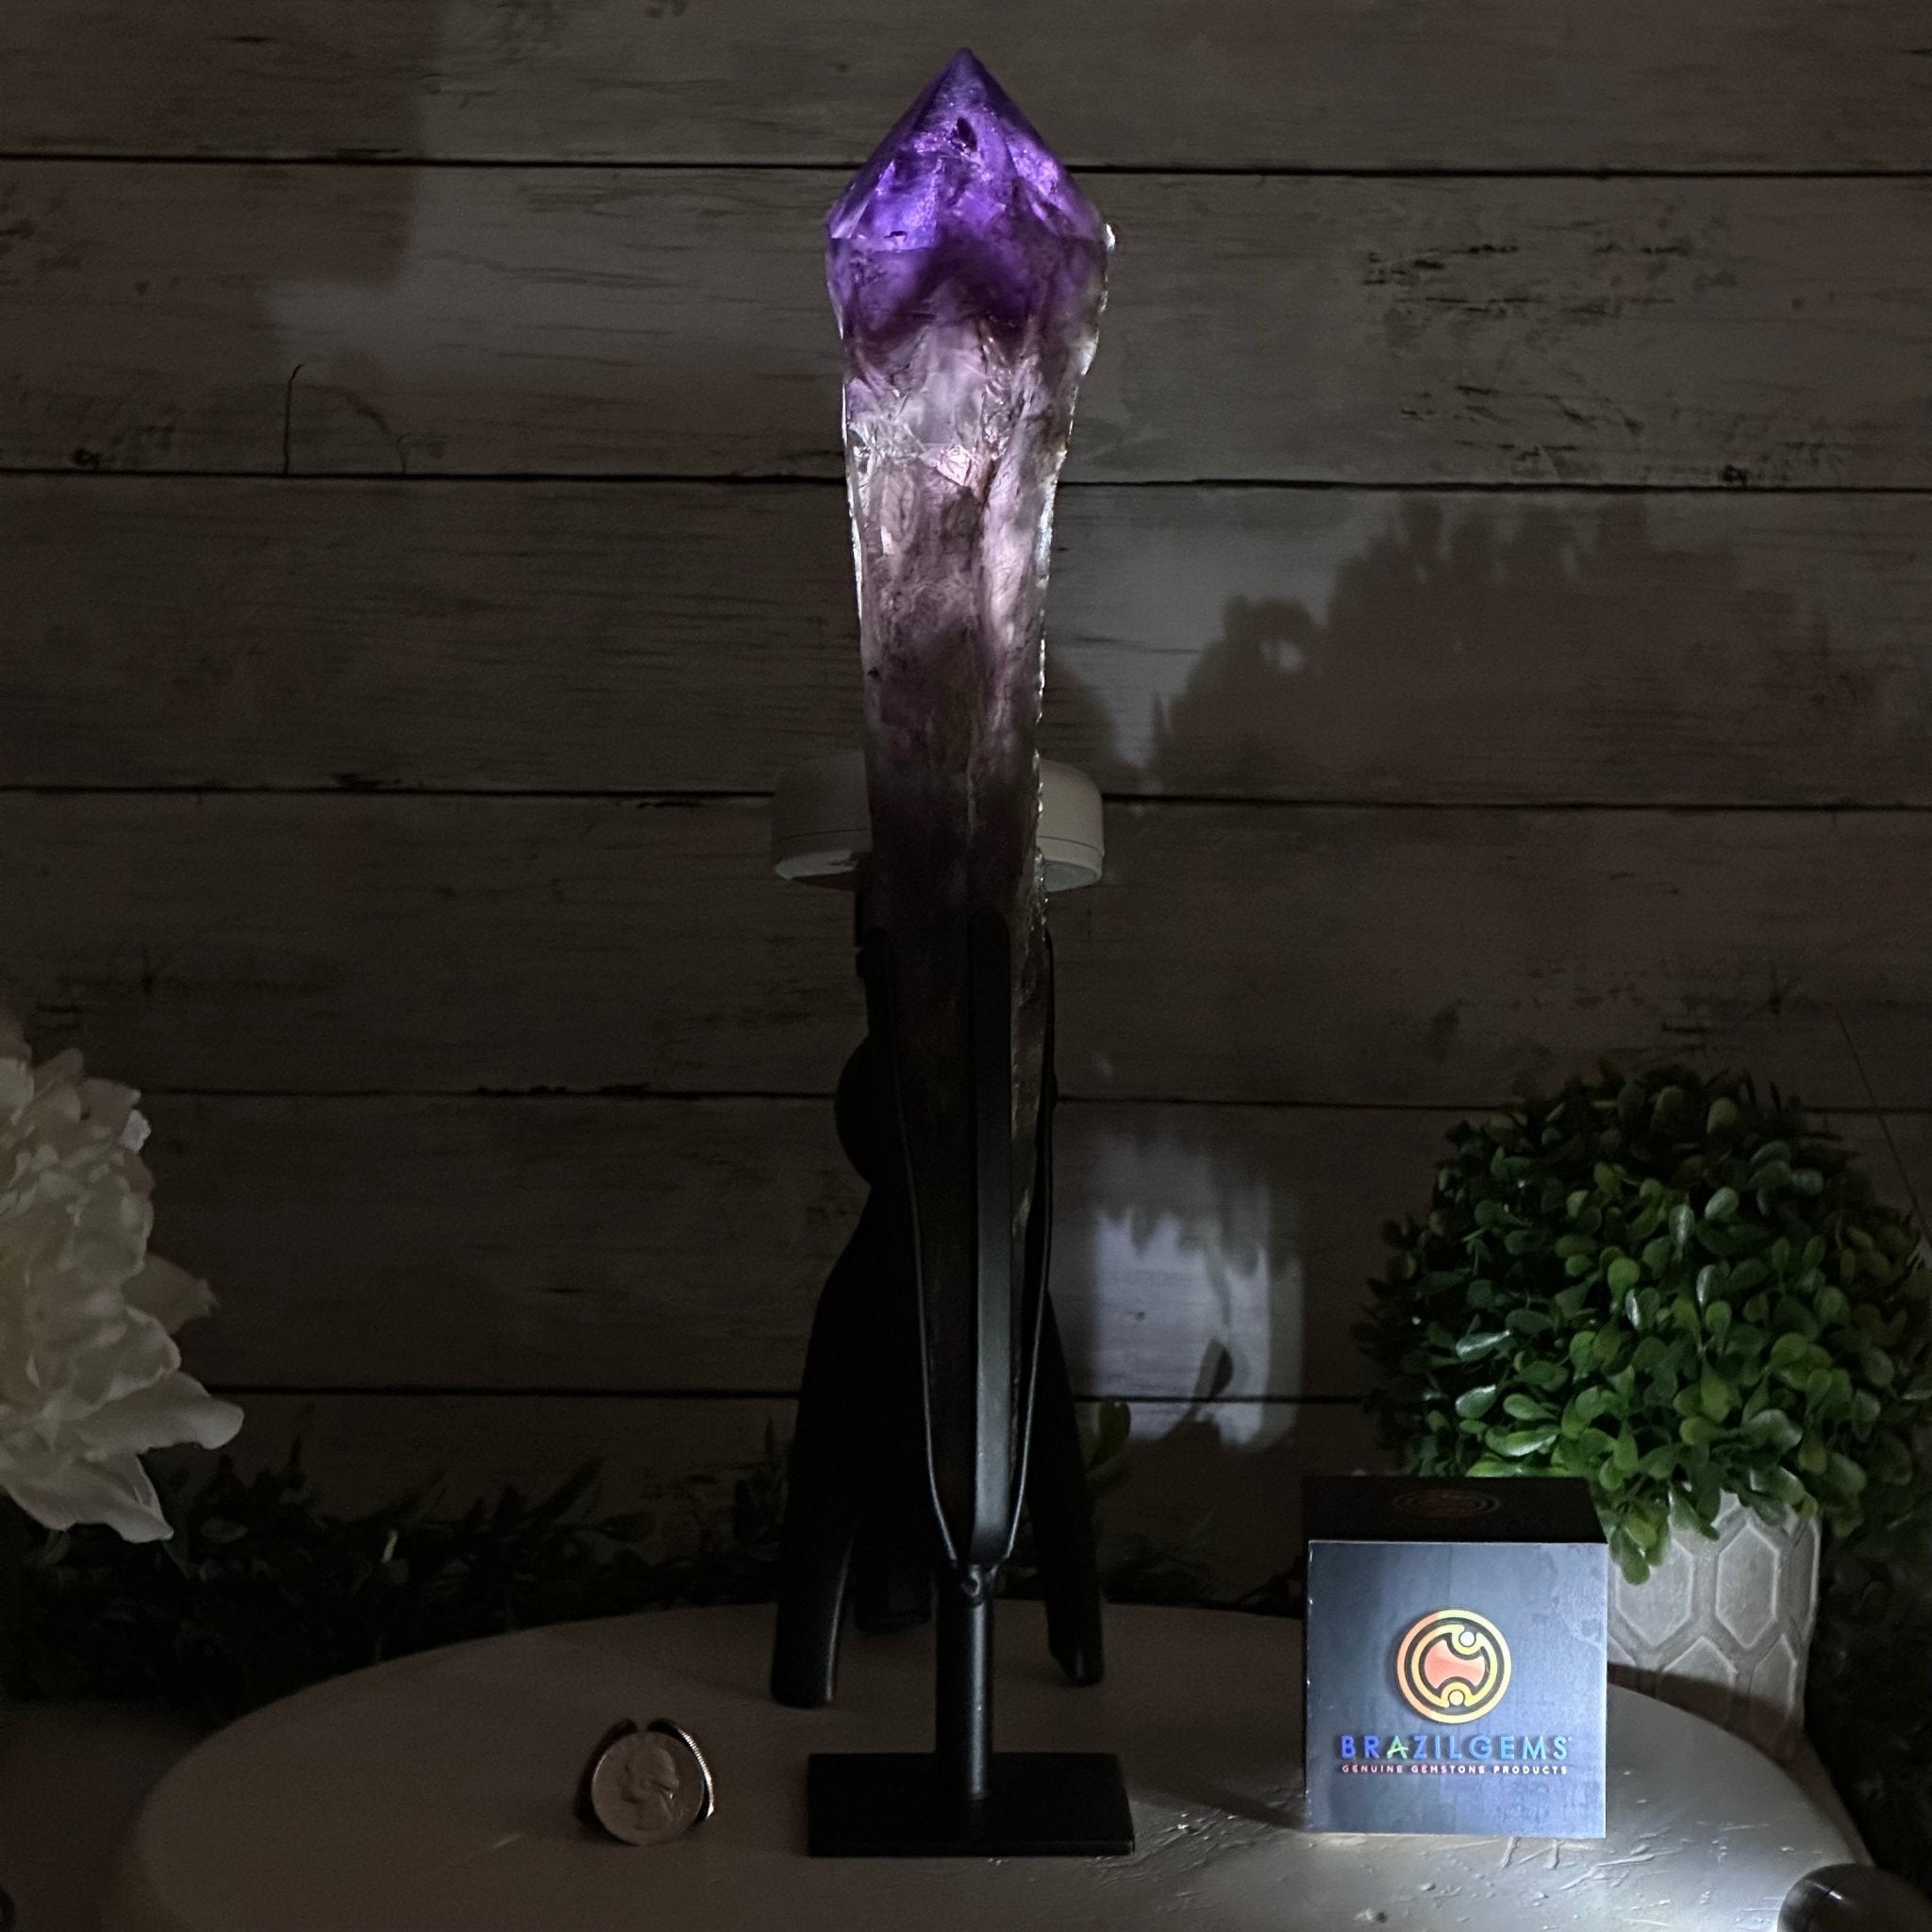 Super Quality Amethyst Wand on a Metal Stand, 2.7 lbs & 15.1" Tall #3123AM-014 - Brazil GemsBrazil GemsSuper Quality Amethyst Wand on a Metal Stand, 2.7 lbs & 15.1" Tall #3123AM-014Clusters on Fixed Bases3123AM-014